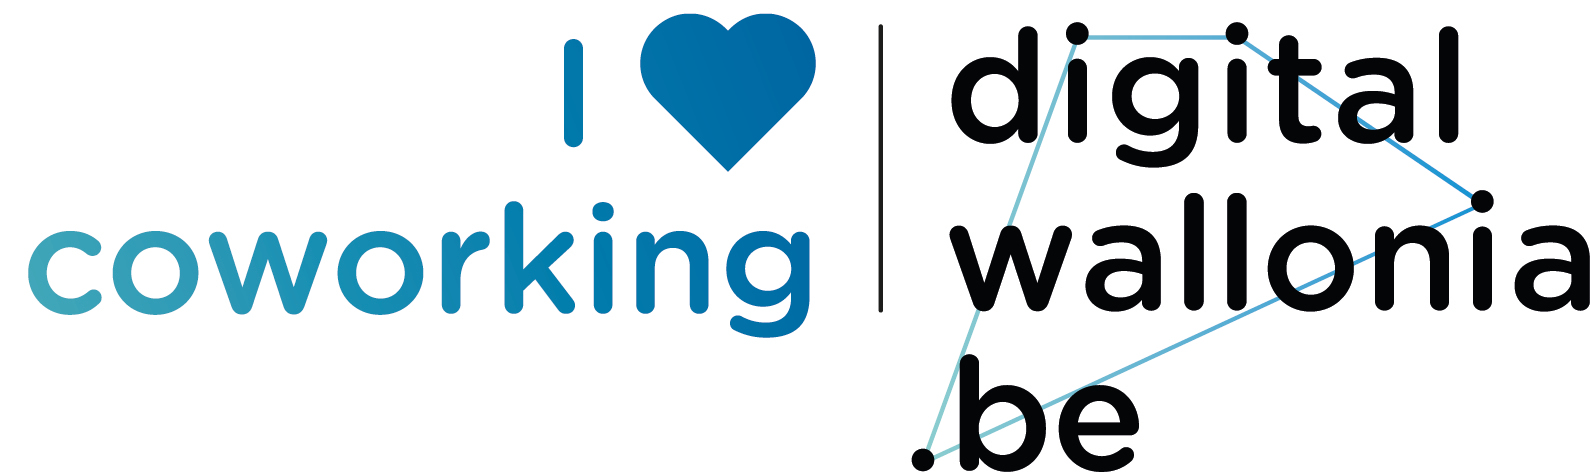 logo-dw-i-love-coworking-preview.jpg